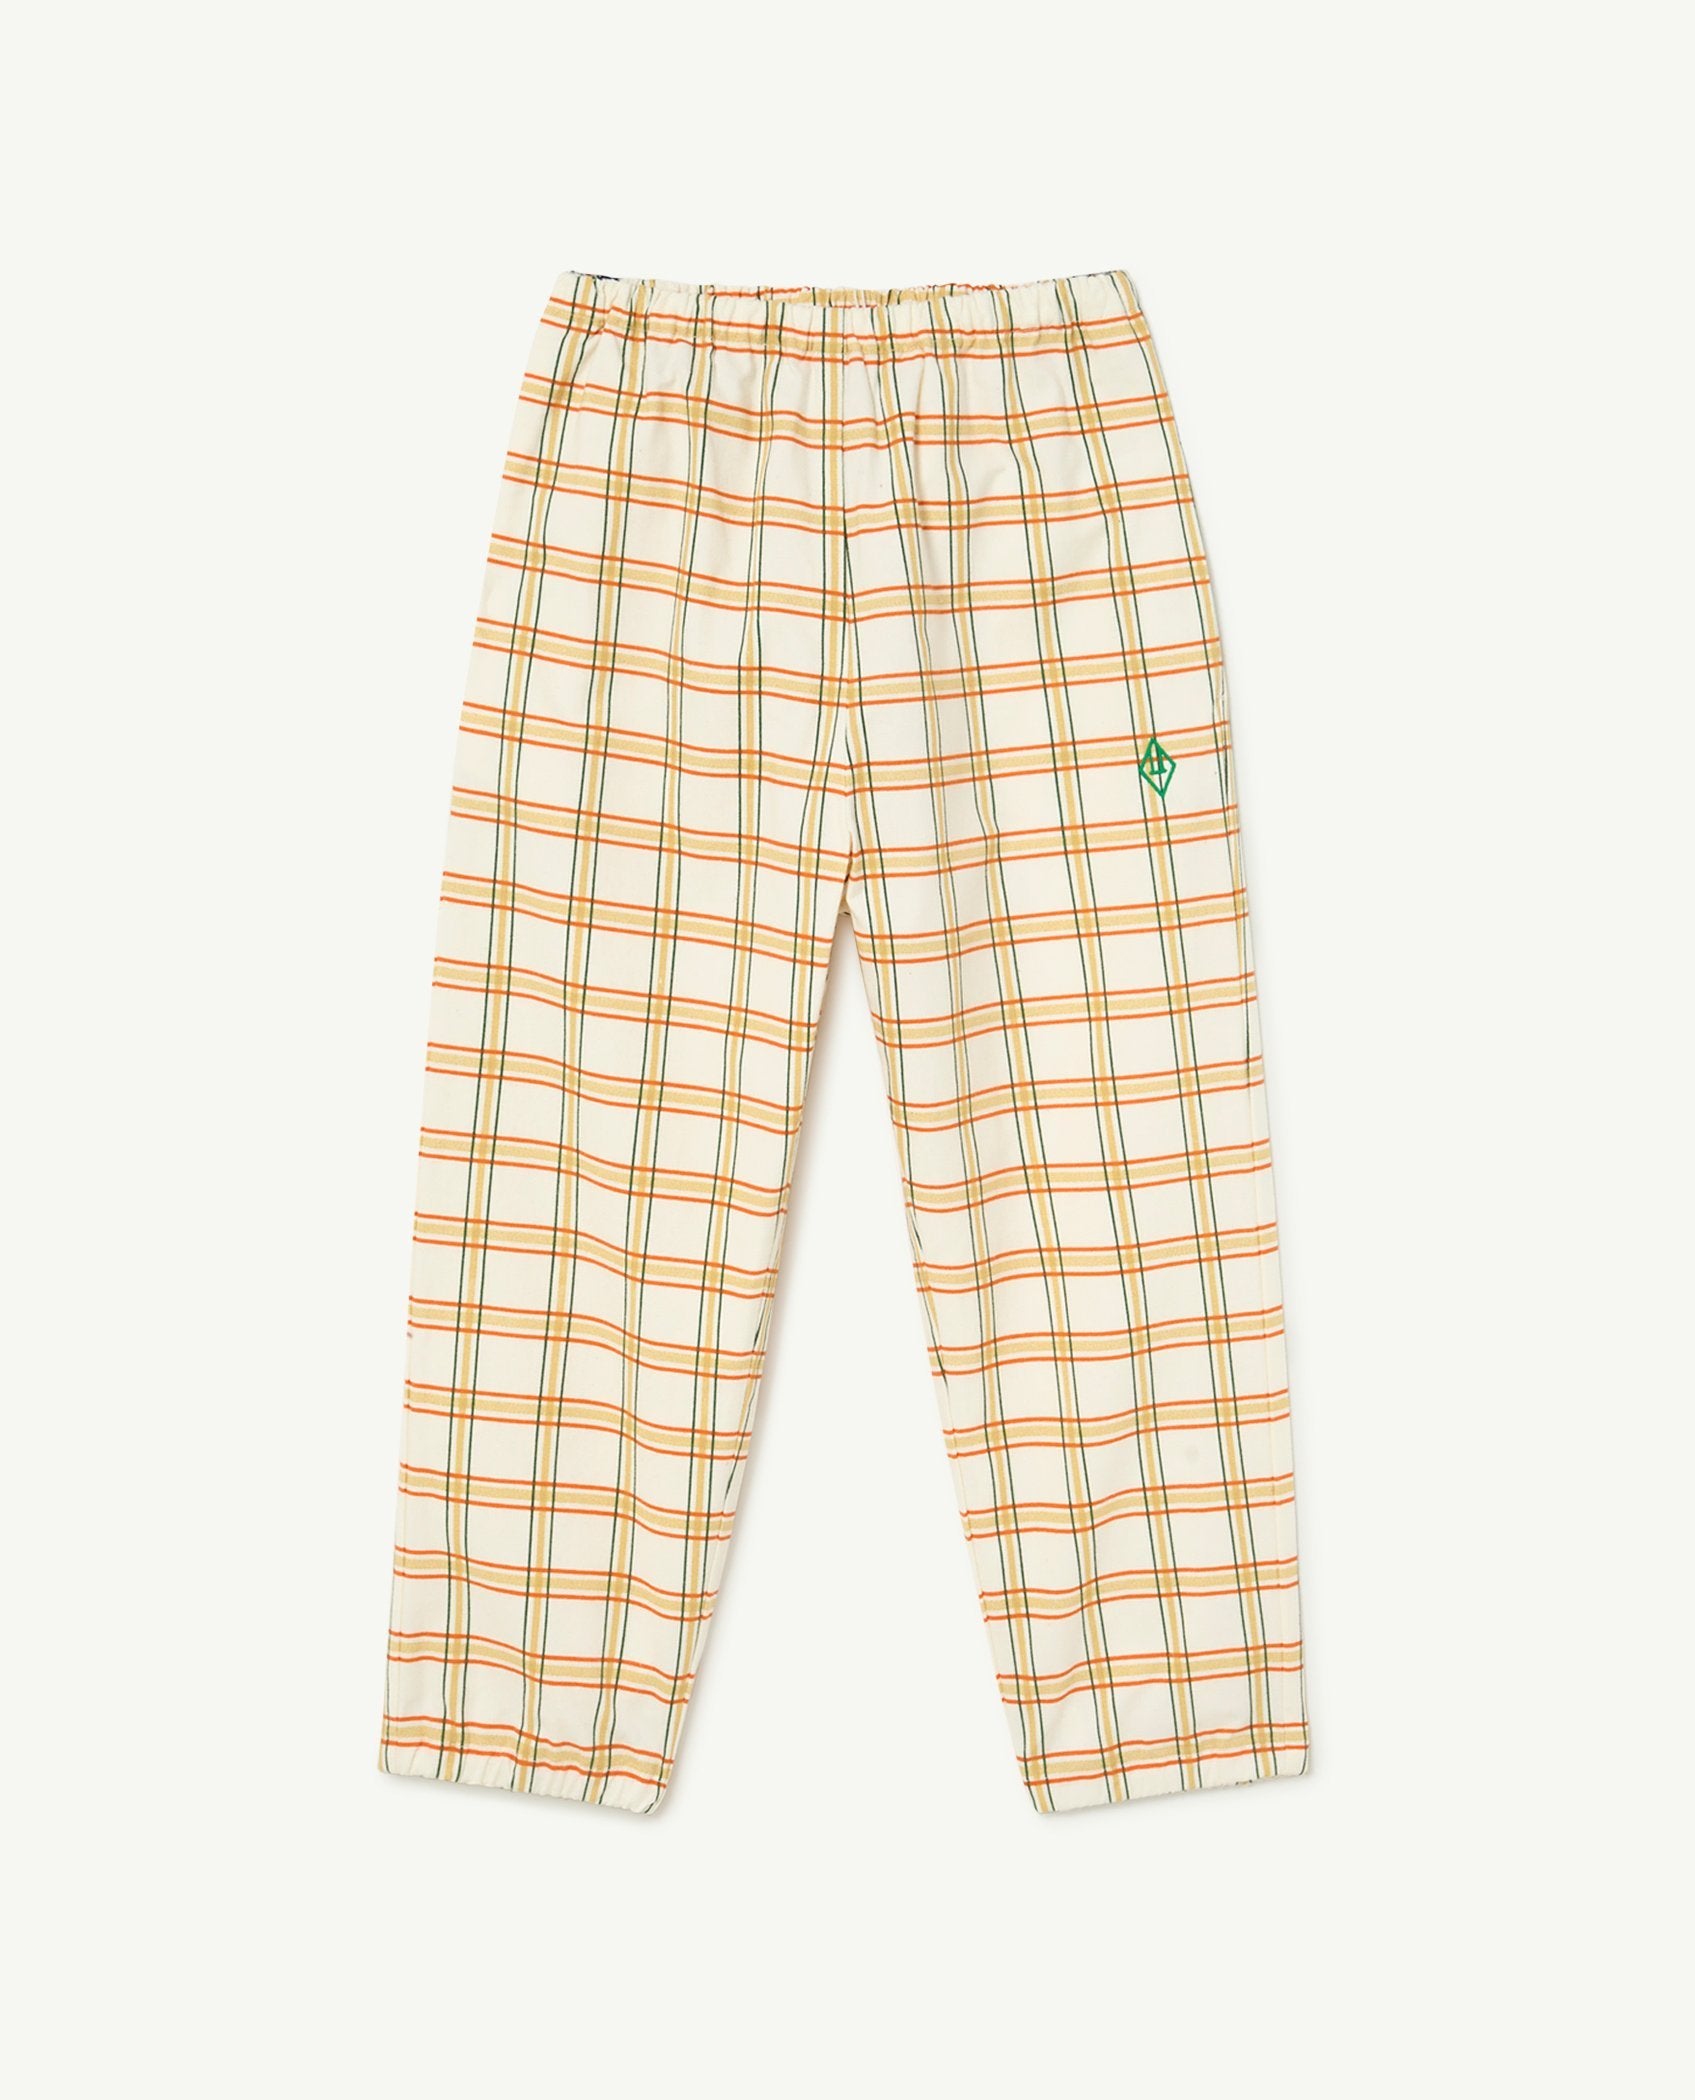 White Square Elephant Pants PRODUCT FRONT